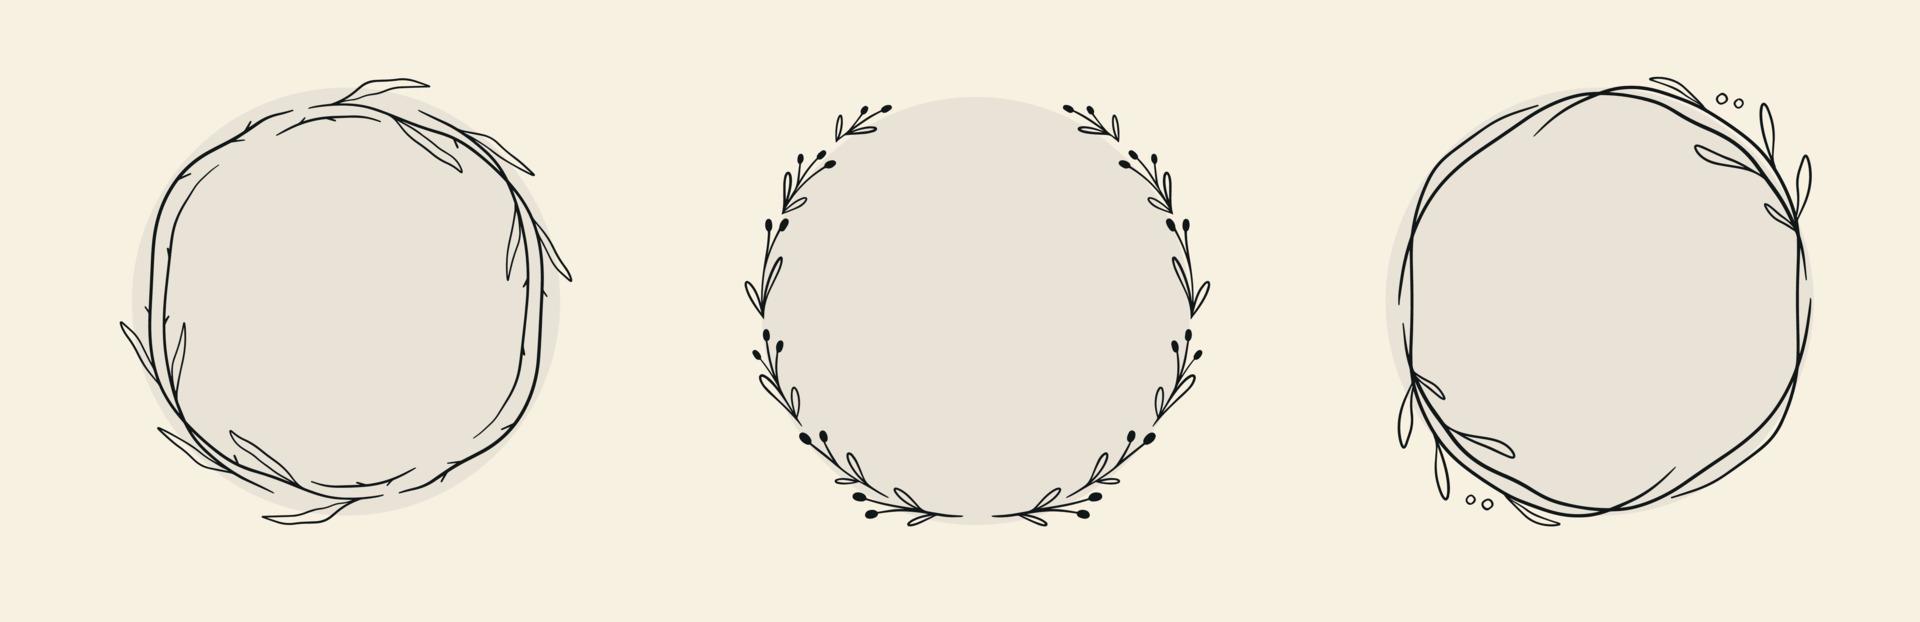 Set of black Doodle hand drawn decorative Circle floral frame. Vector Wreath with branches, herbs, plants, leaves. Isolated illustration on white background